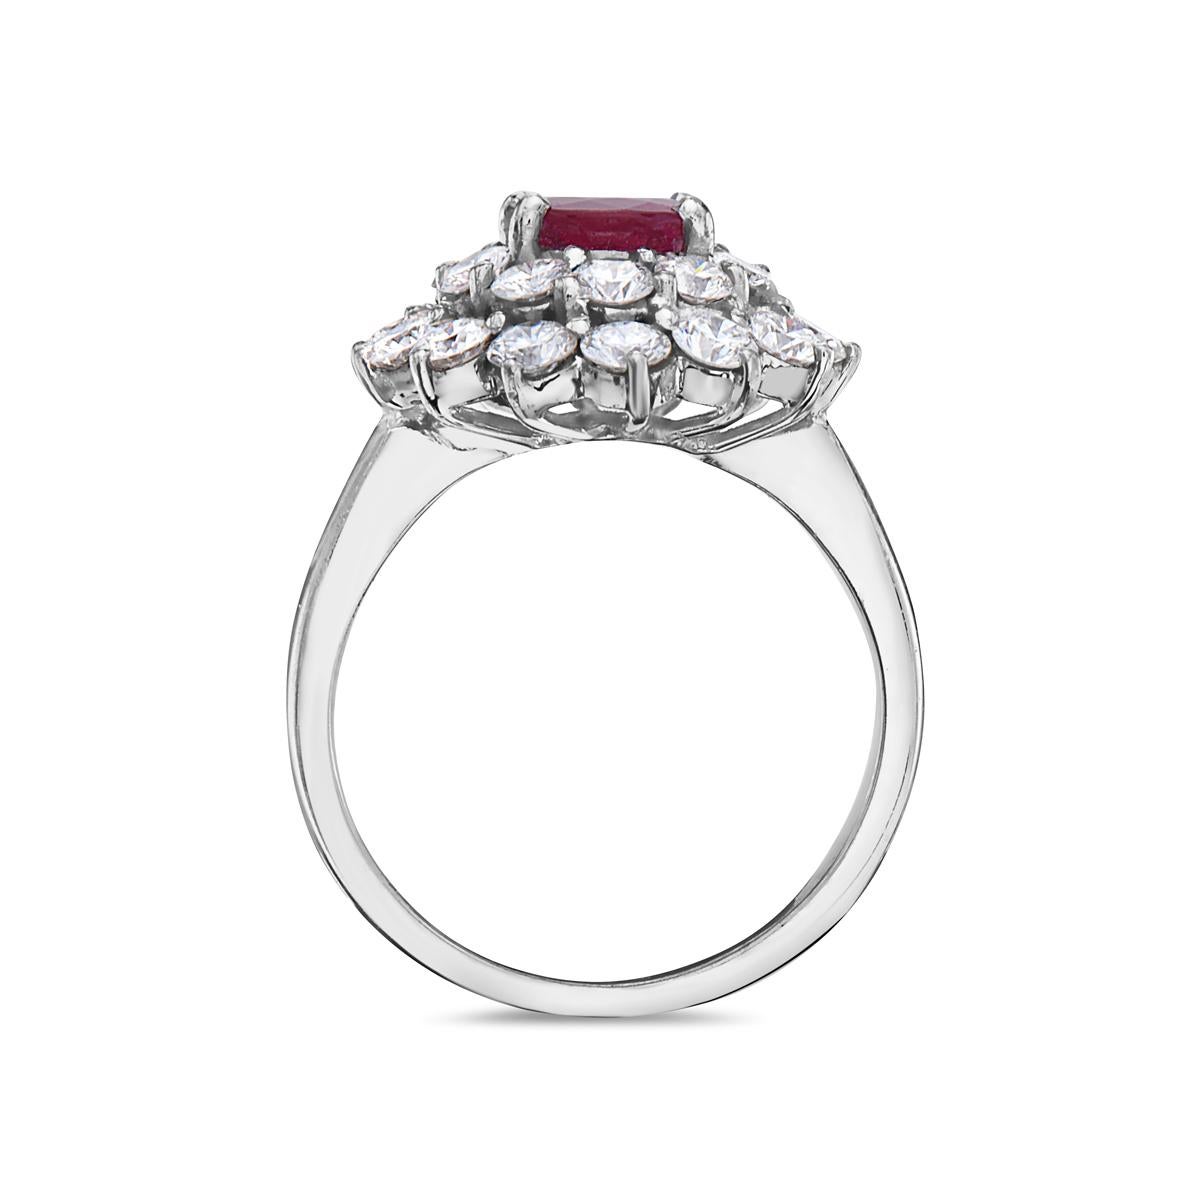 This cocktail ring features a 1.12 carat round cut ruby and and 28 round diamonds G-H color VS  clarity weighing 1.86 carats set in 18K white gold.

Resizeable upon request.

Viewings available in our NYC showroom by appointment.

